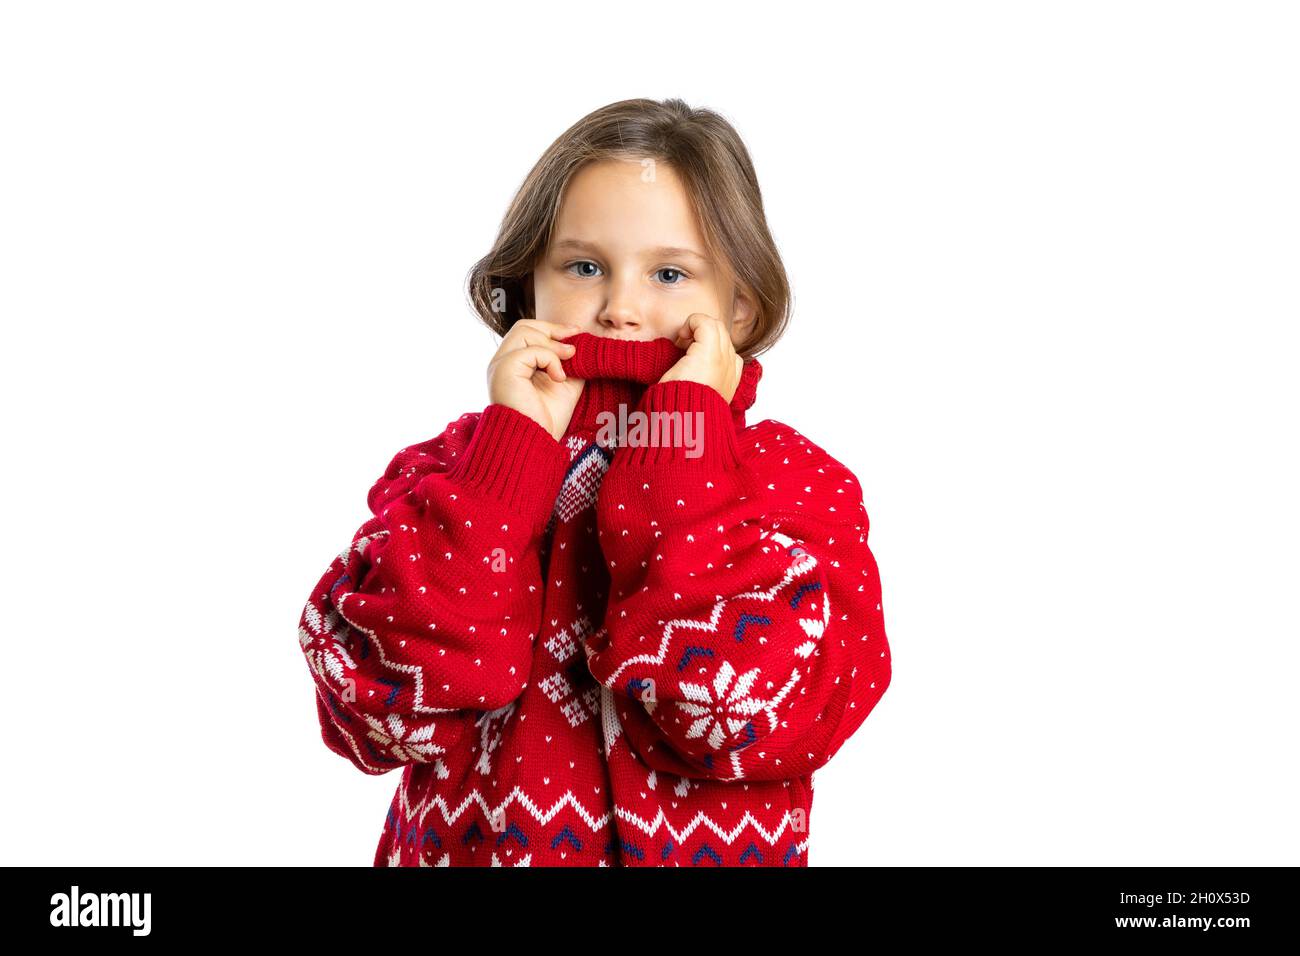 portrait of beautiful girl in oversize red knitted Christmas sweater with reindeer touching high collar, isolated on white background Stock Photo